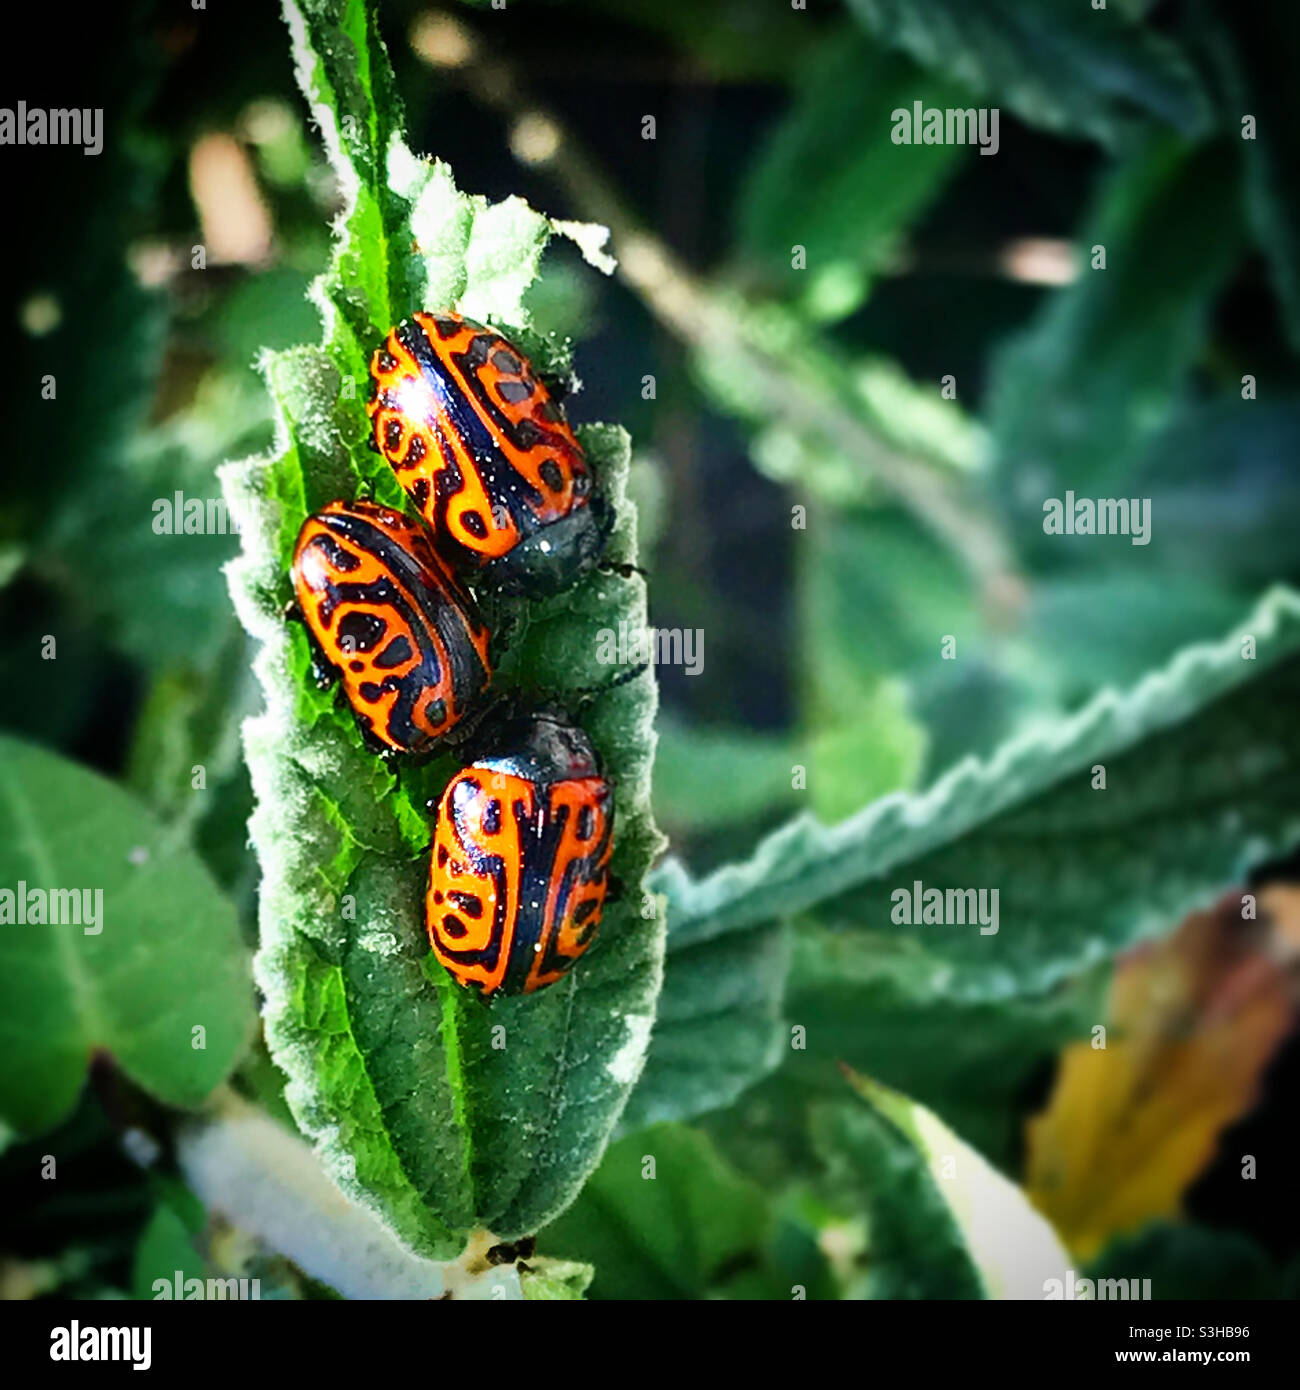 Three ladybugs in a green leaf in a forest in Mexico Stock Photo